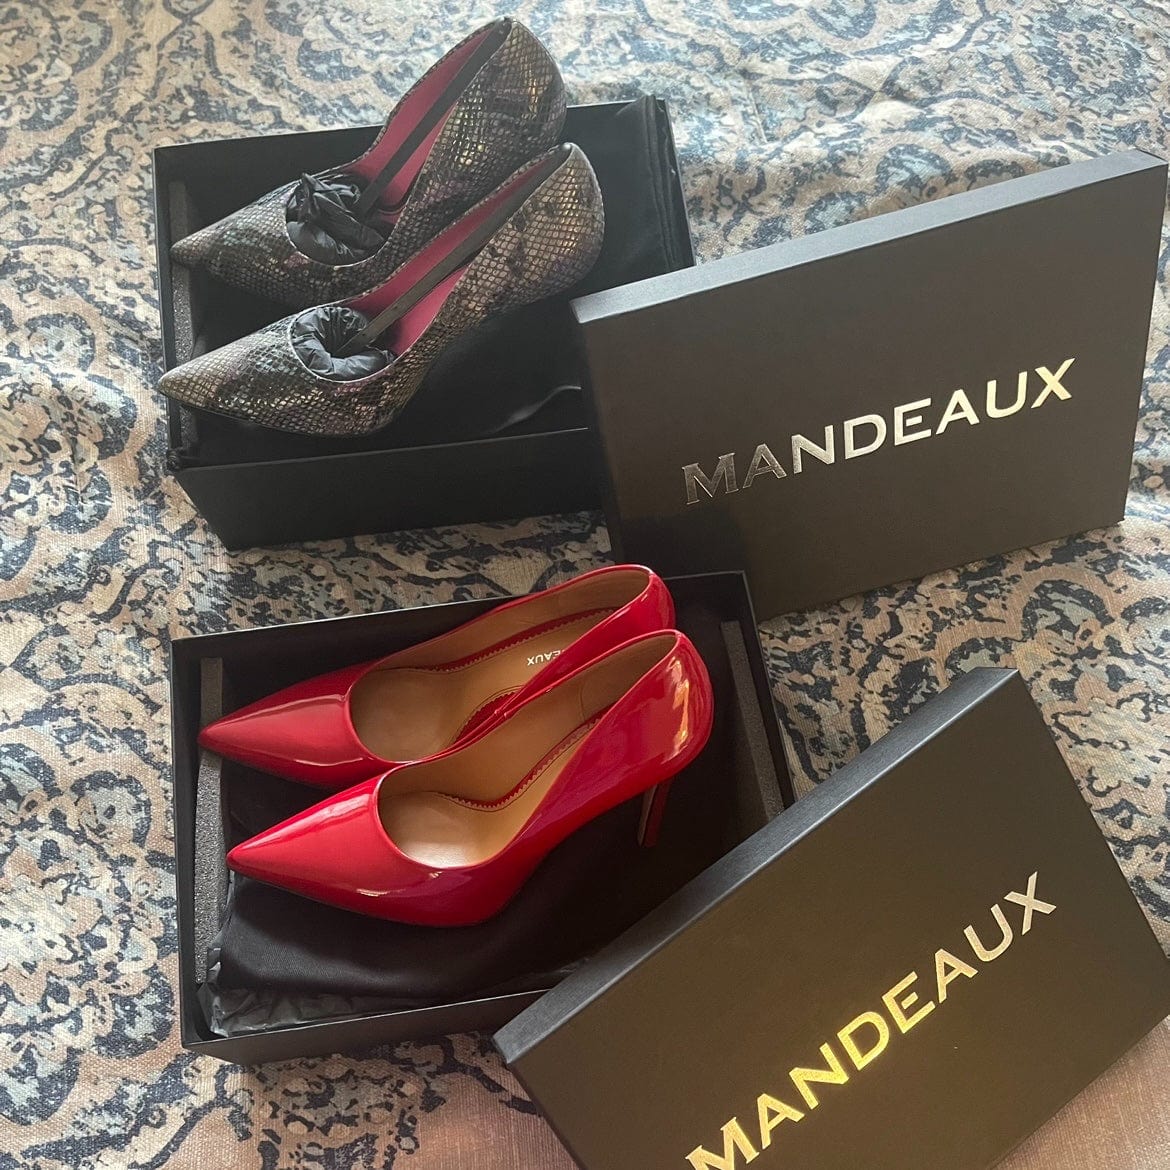 Sydney's Fashion Diary: New Year, New Shoes (My First Christian Louboutin)